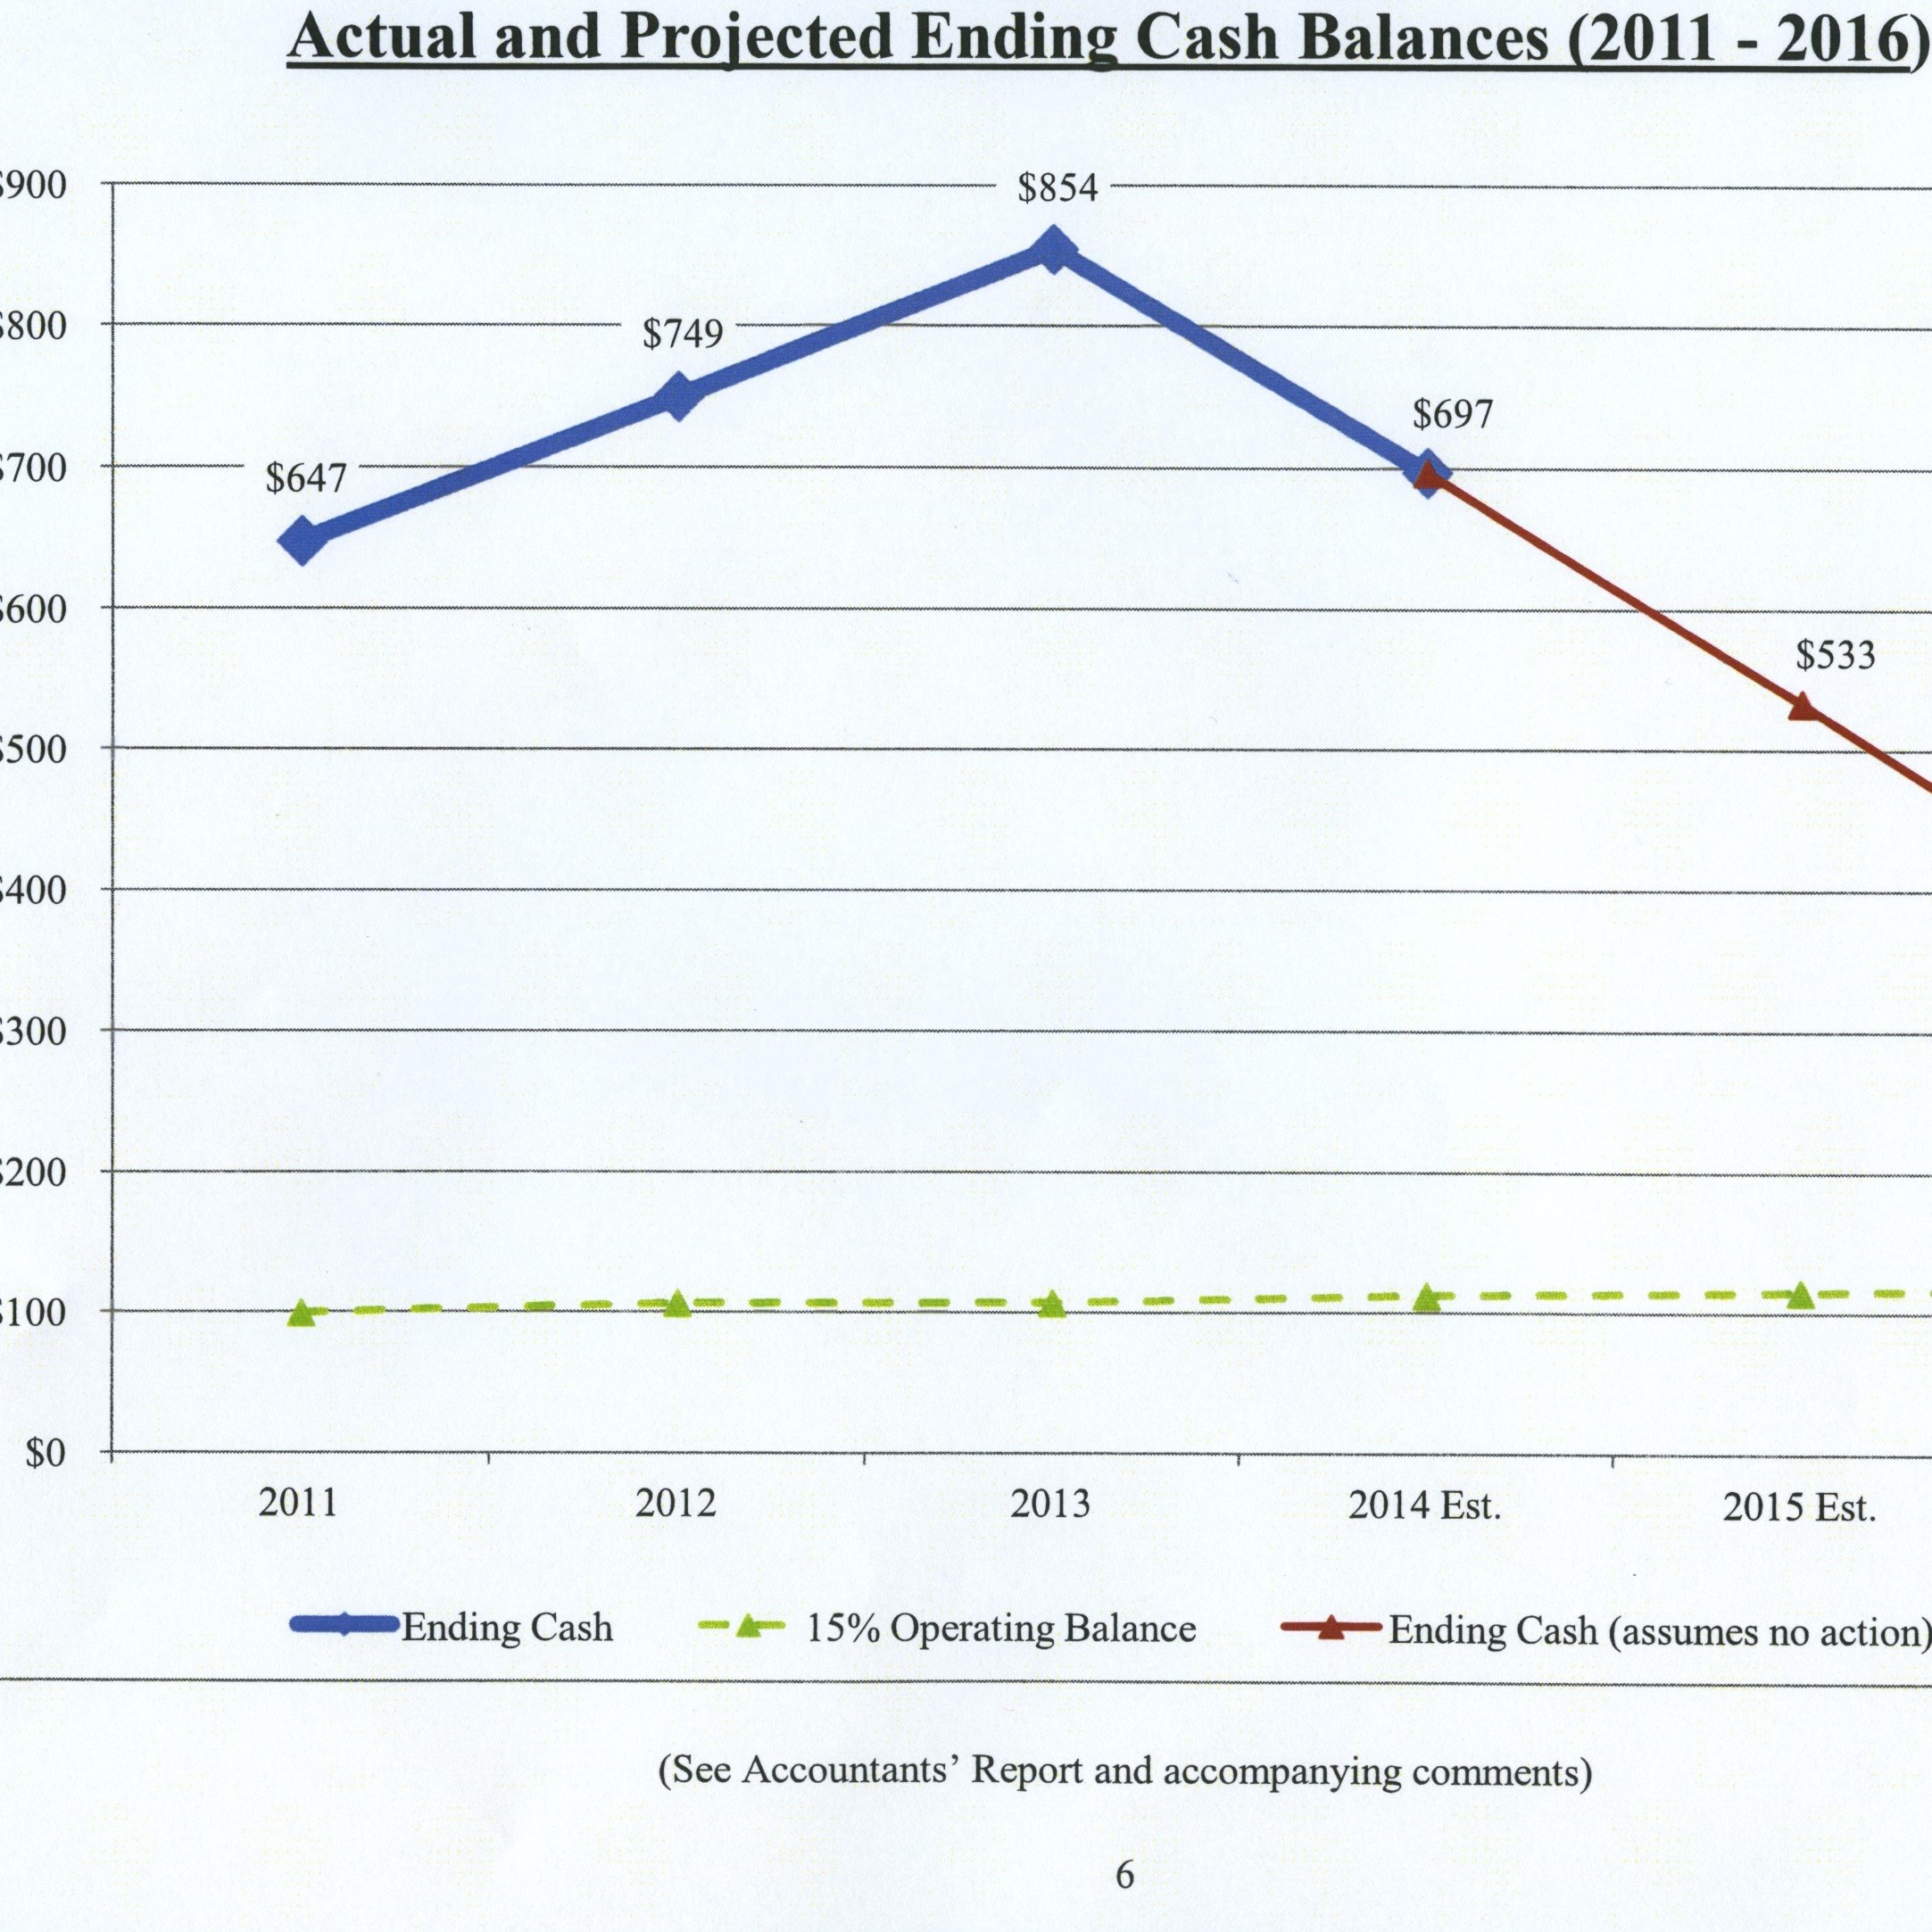 Kosciusko County Health Fund Actual and Projected Ending Cash Flows (2011-2016) Graph